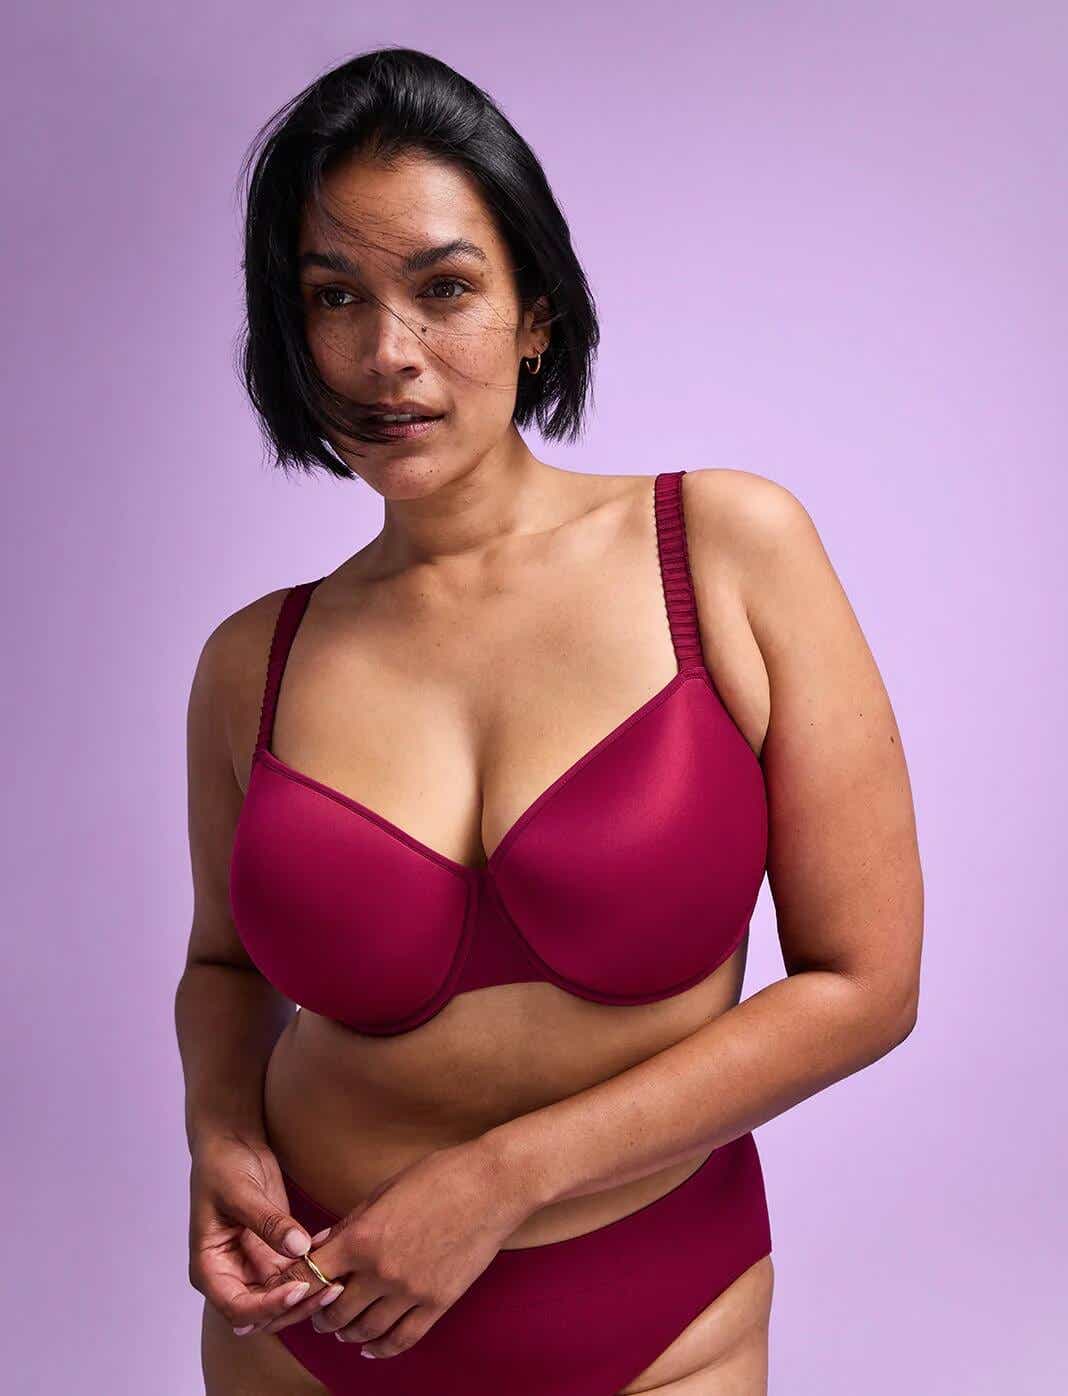 14 Best Bras for Big Boobs - Most Supportive Bras for Big Breast Sizes